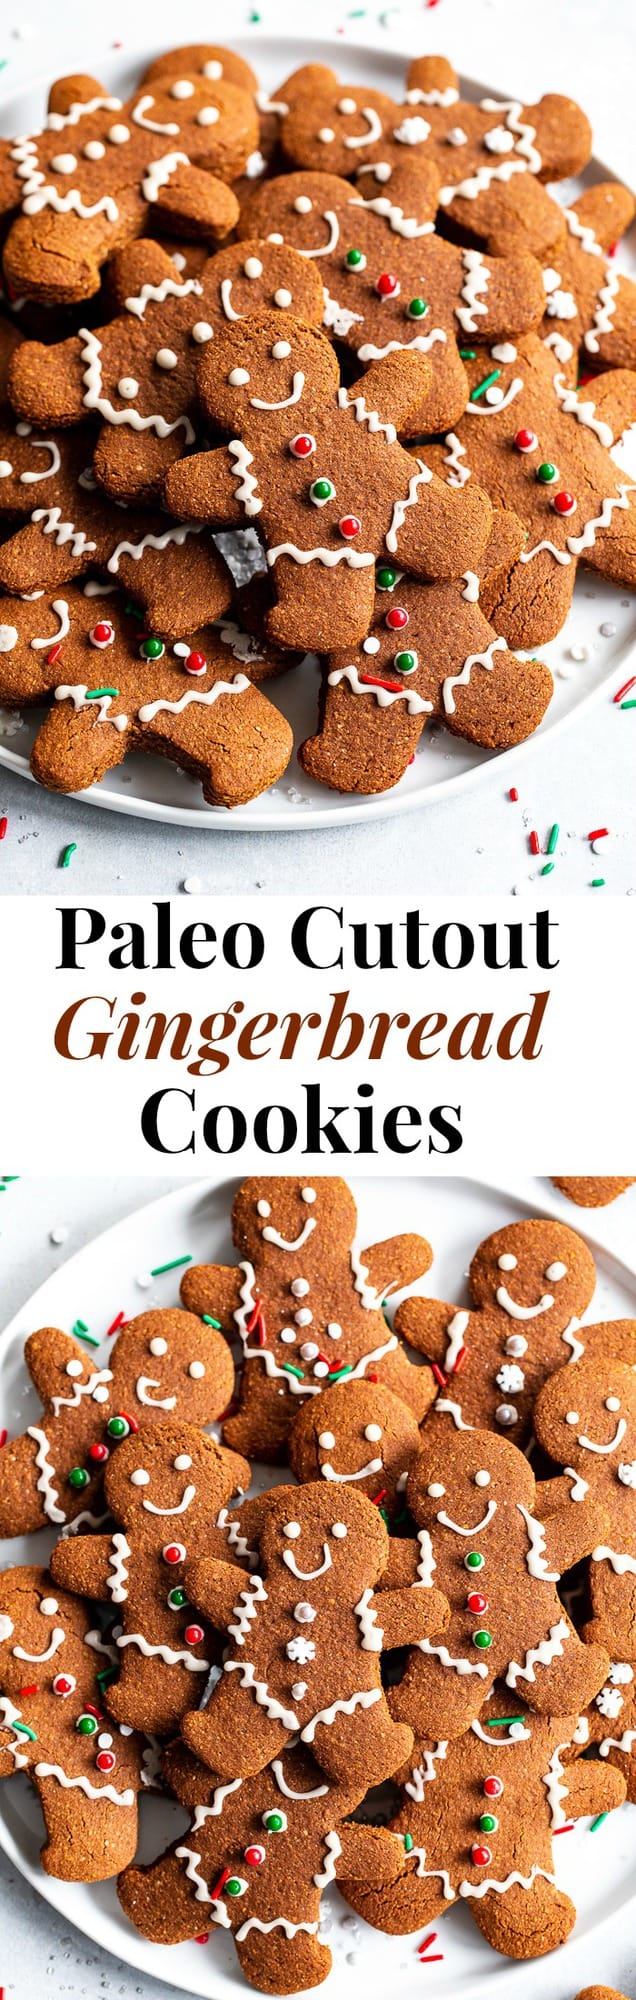 These paleo gingerbread cookies are chewy and crisp with traditional flavor from molasses and spices.  The dough is easy to work with and cut making them perfect for holiday baking and decorating!